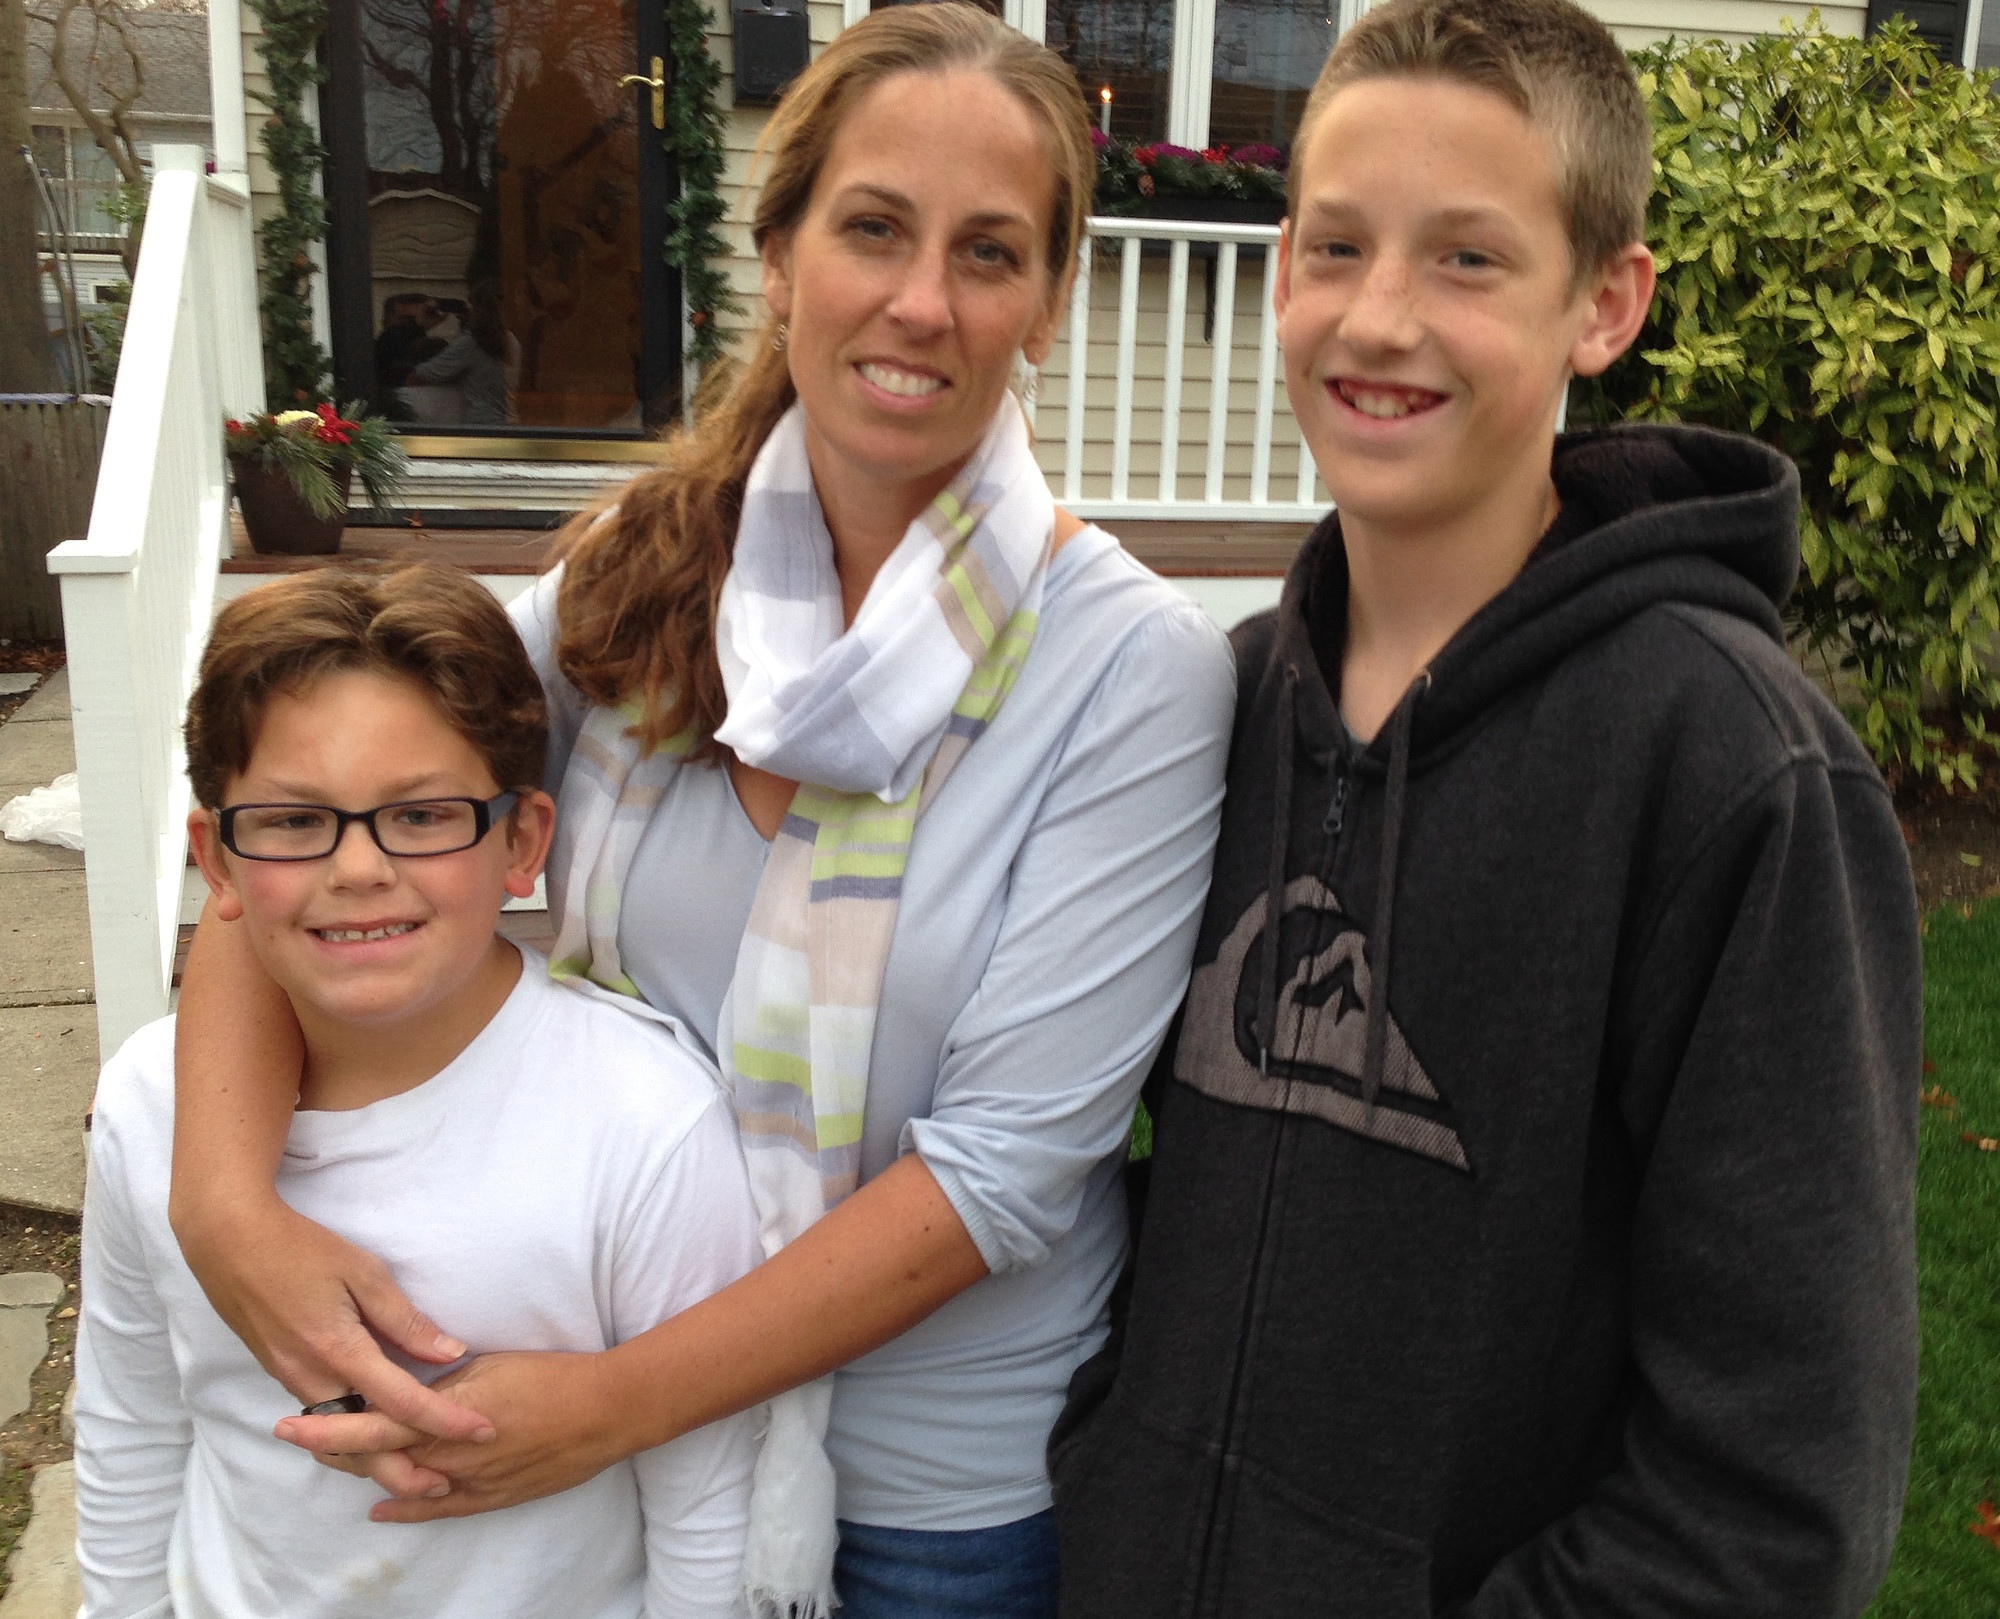 For all that Jeanette Deutermann has done to reform New York's education system, she is the Bellmore Herald Life's 2015 Person of the Year. She is joined here by her sons, Jack, left, and Tyler.